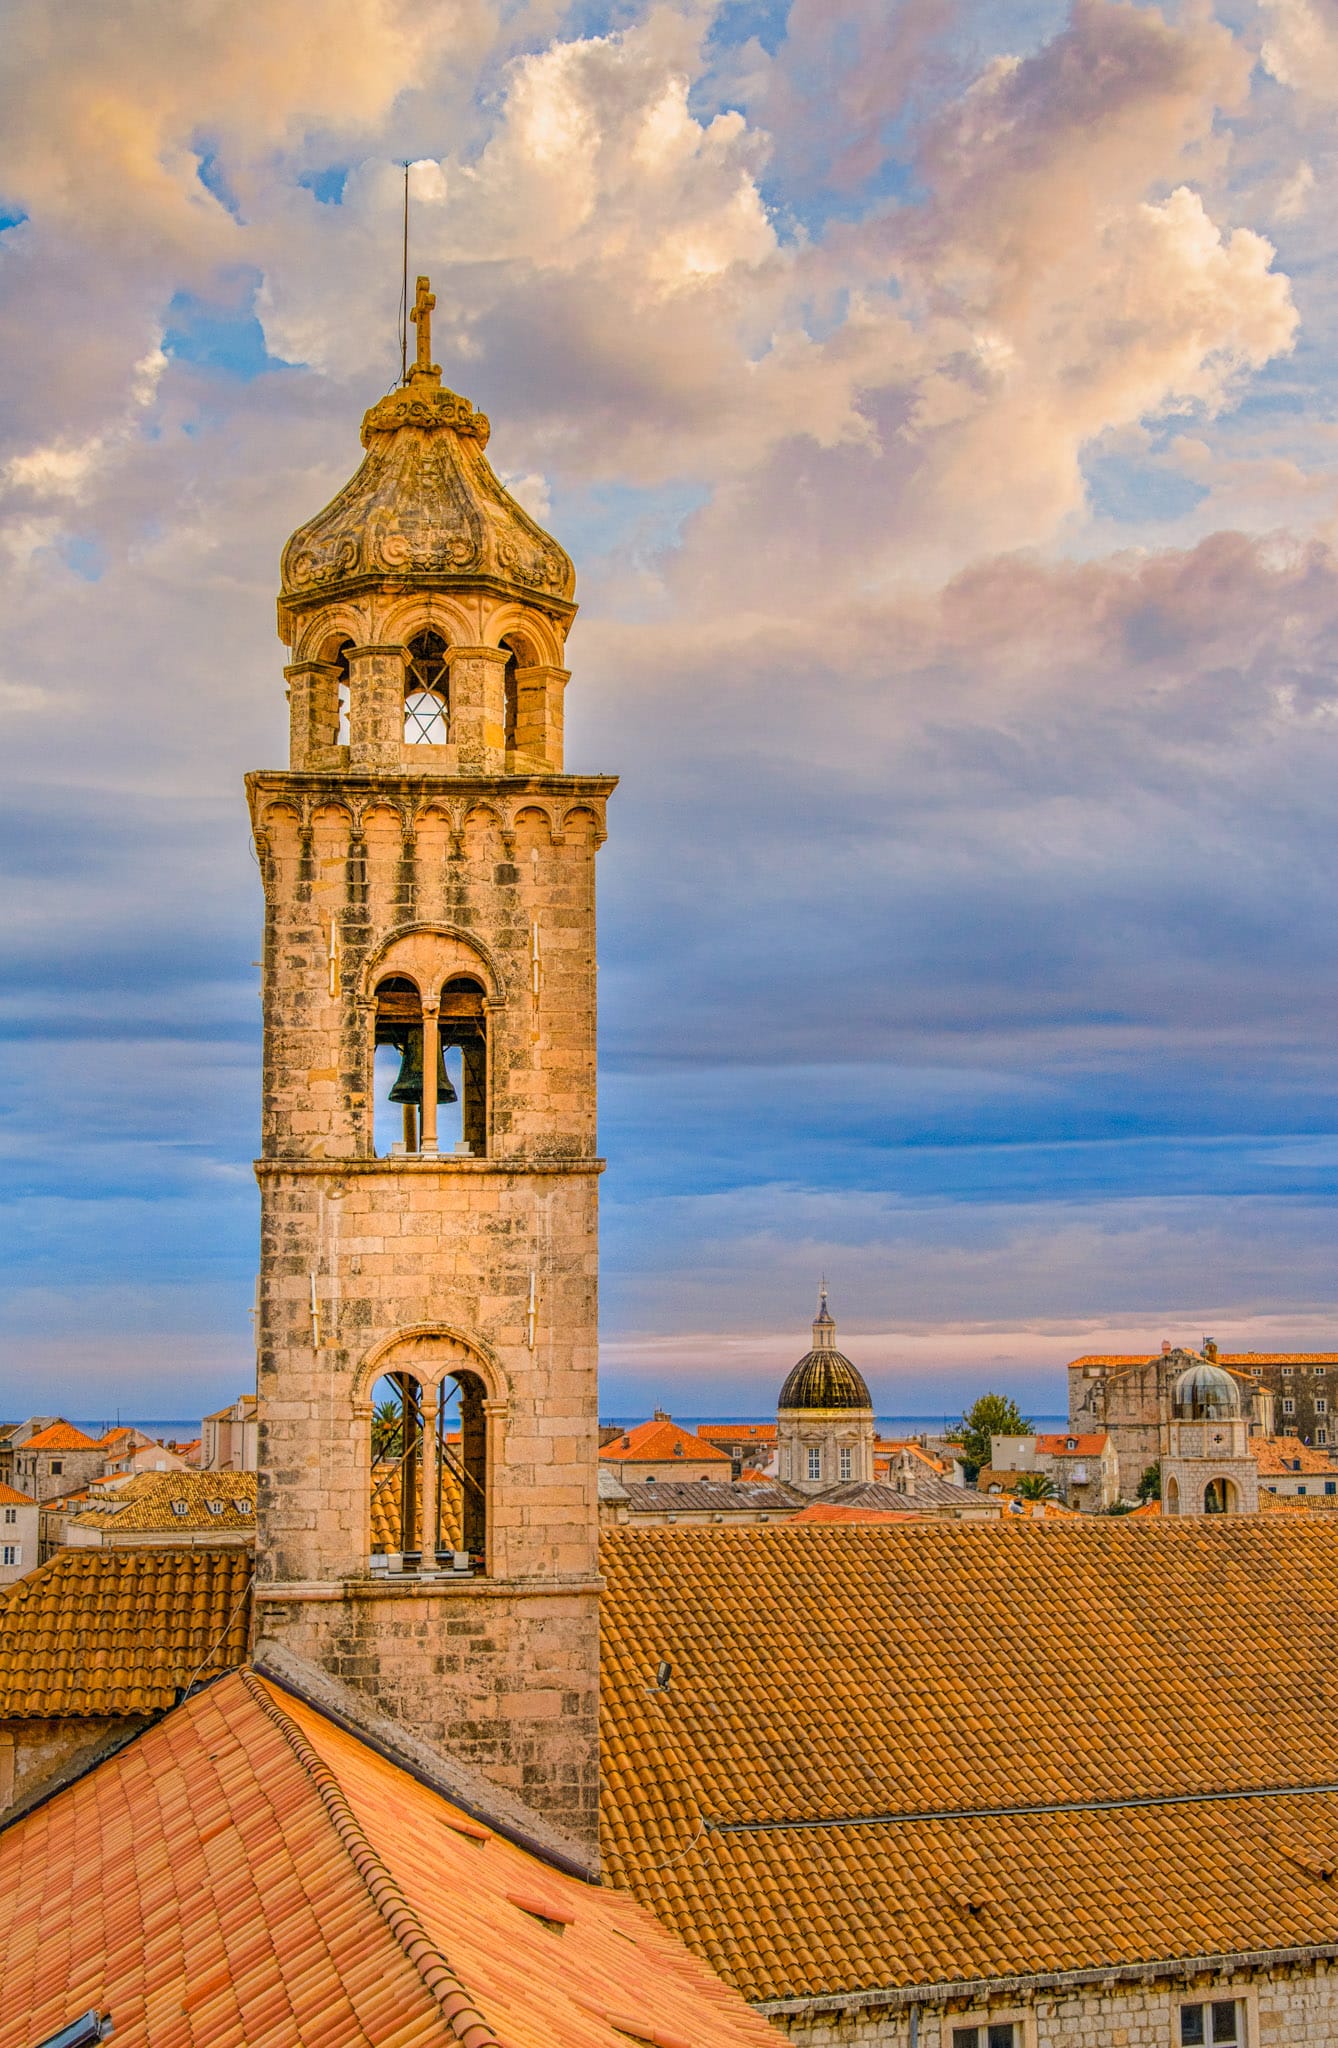 A view of the old Dominican Church and Monastery Bell Tower with Dubrovnik Cathedral and Bell Tower in the distance.